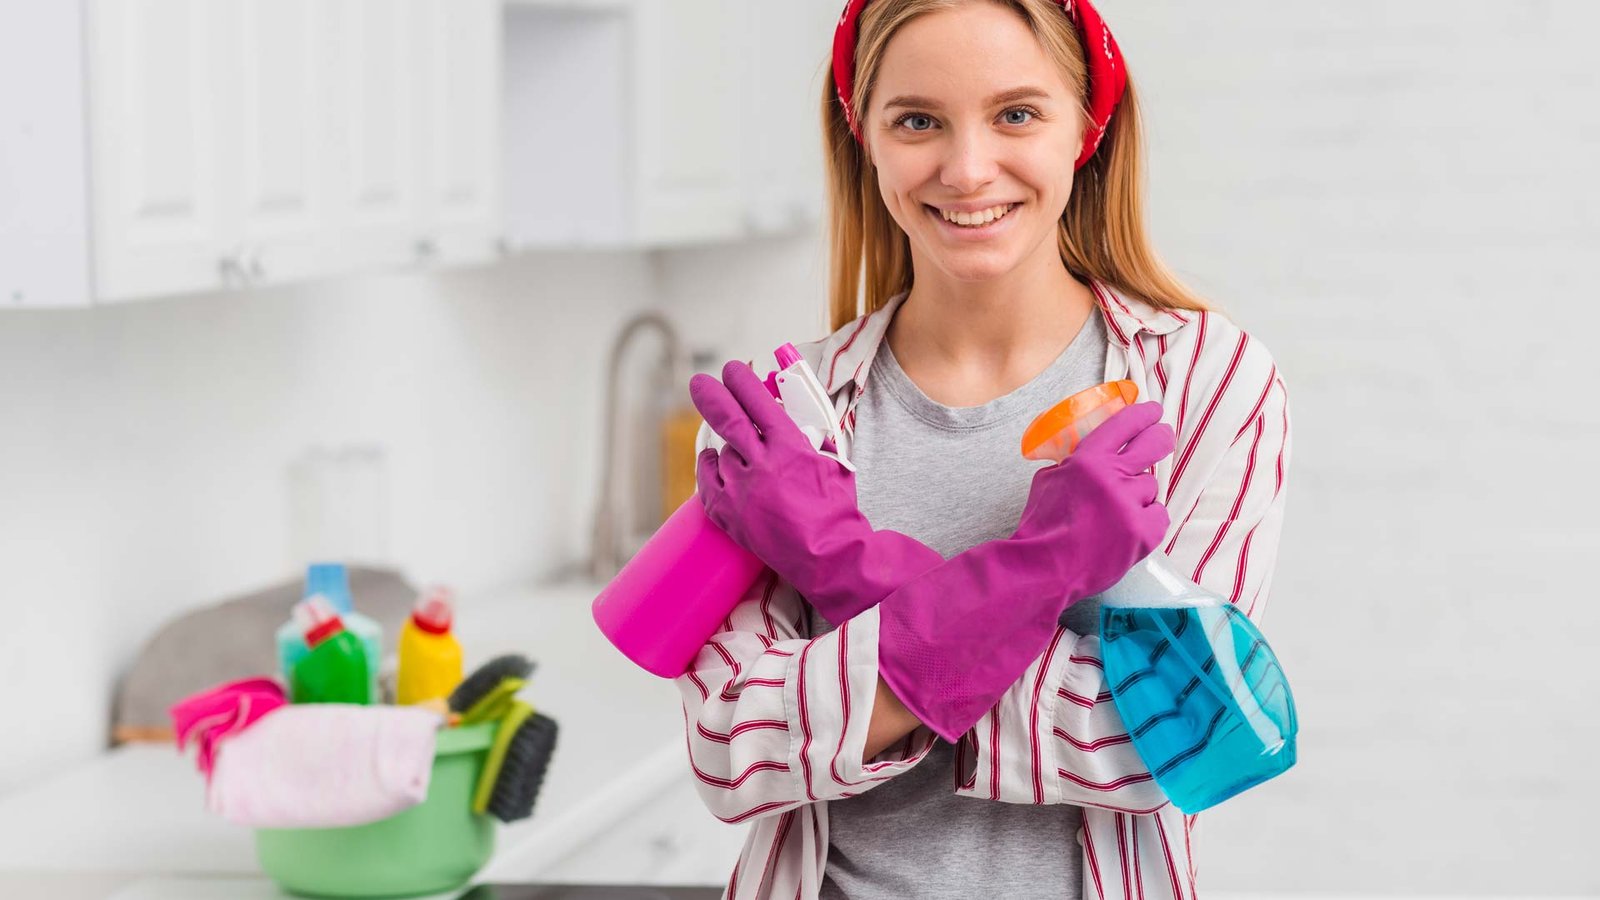 All You Need To Know About the Deep Cleaning Services in Los Angeles